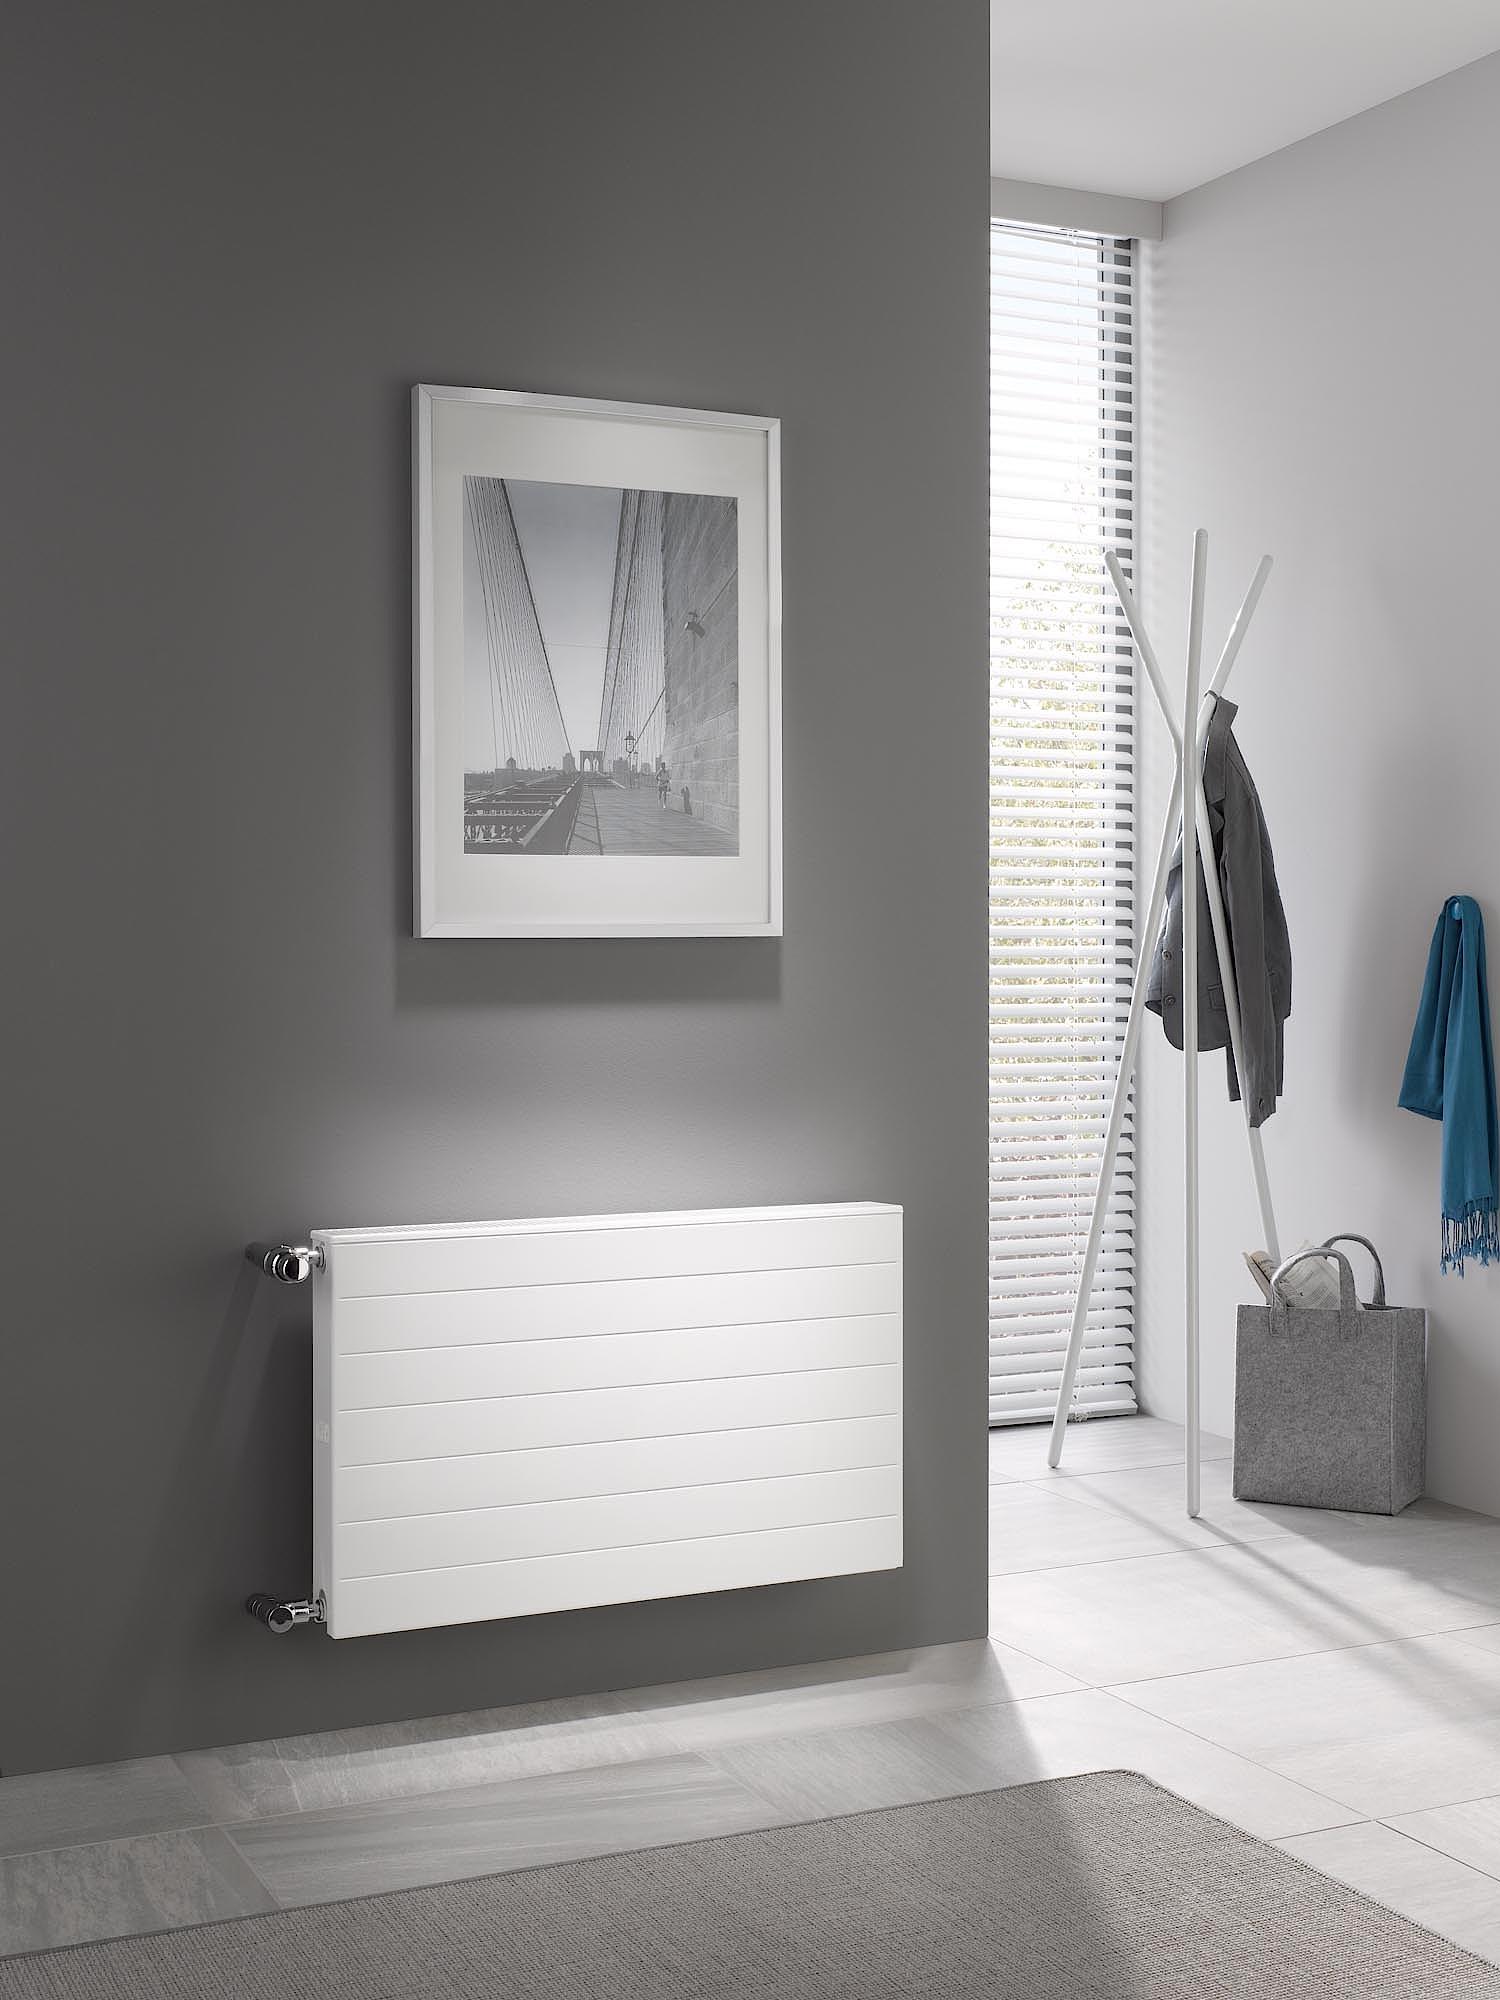 Kermi therm-x2 Line-K compact radiators with a timeless design.